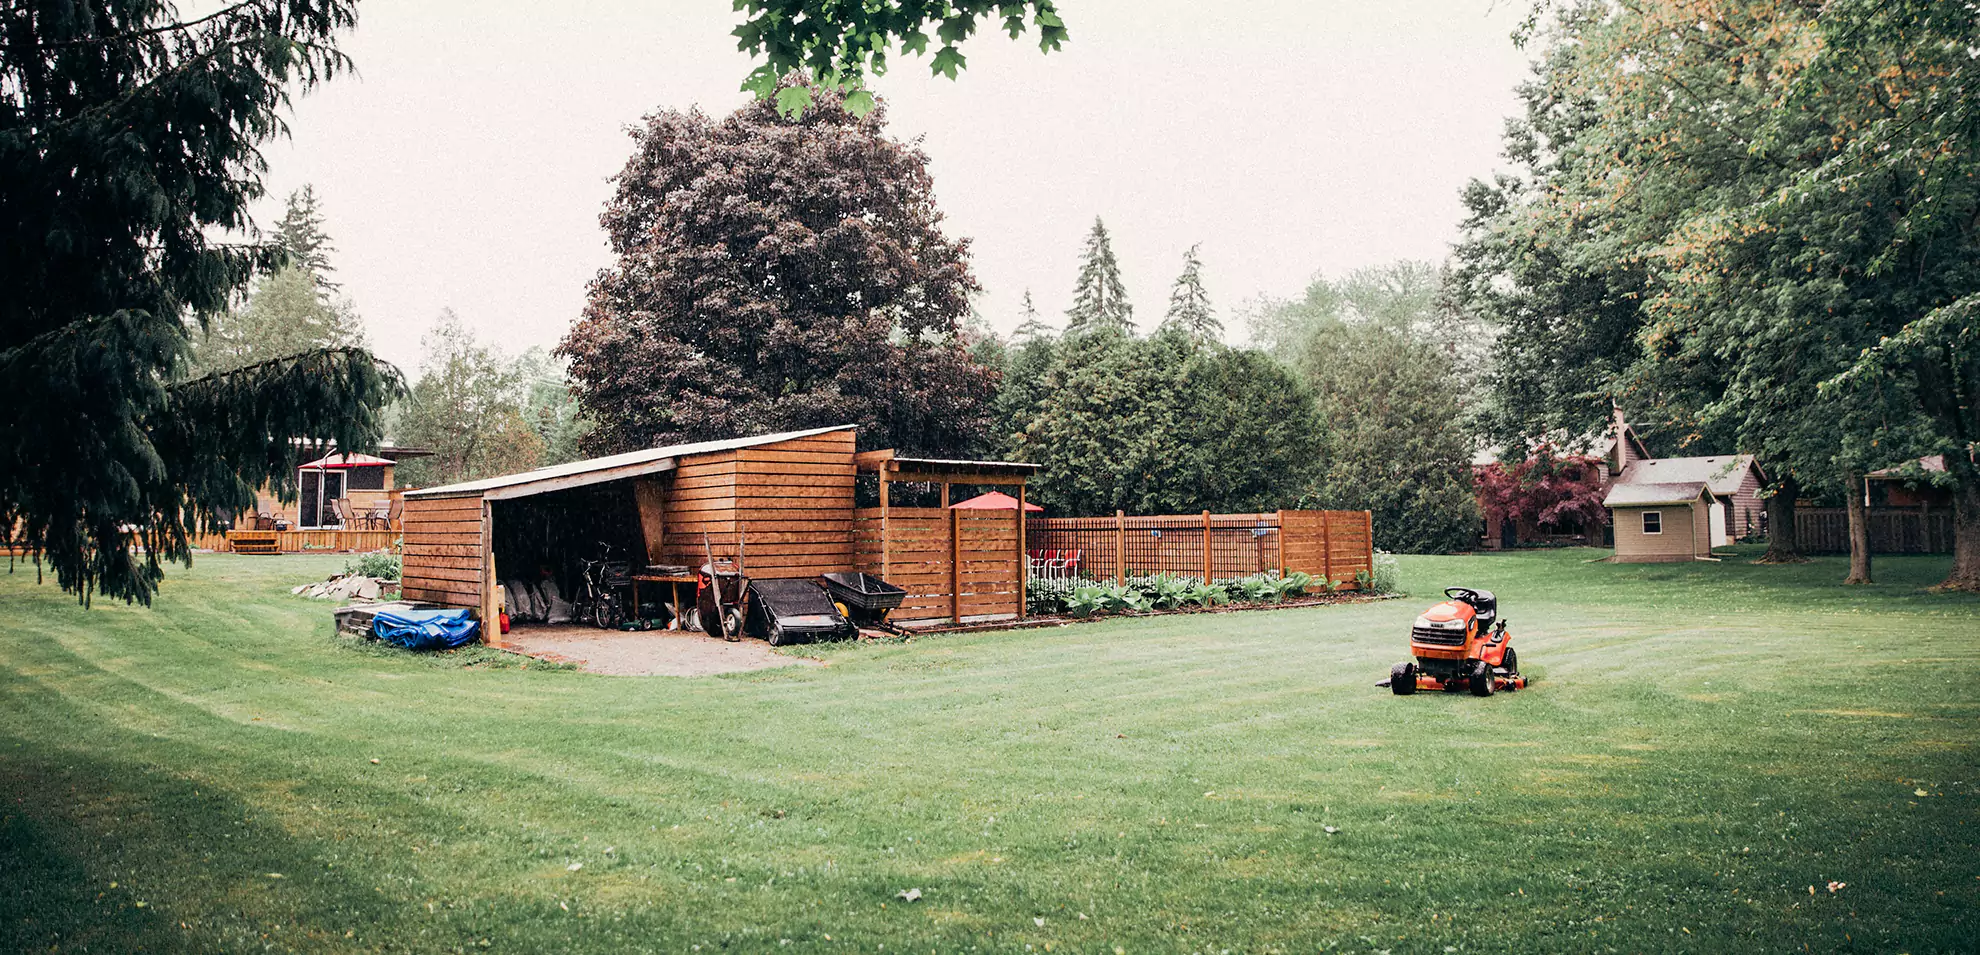 Lawn and garden shed and equipment.